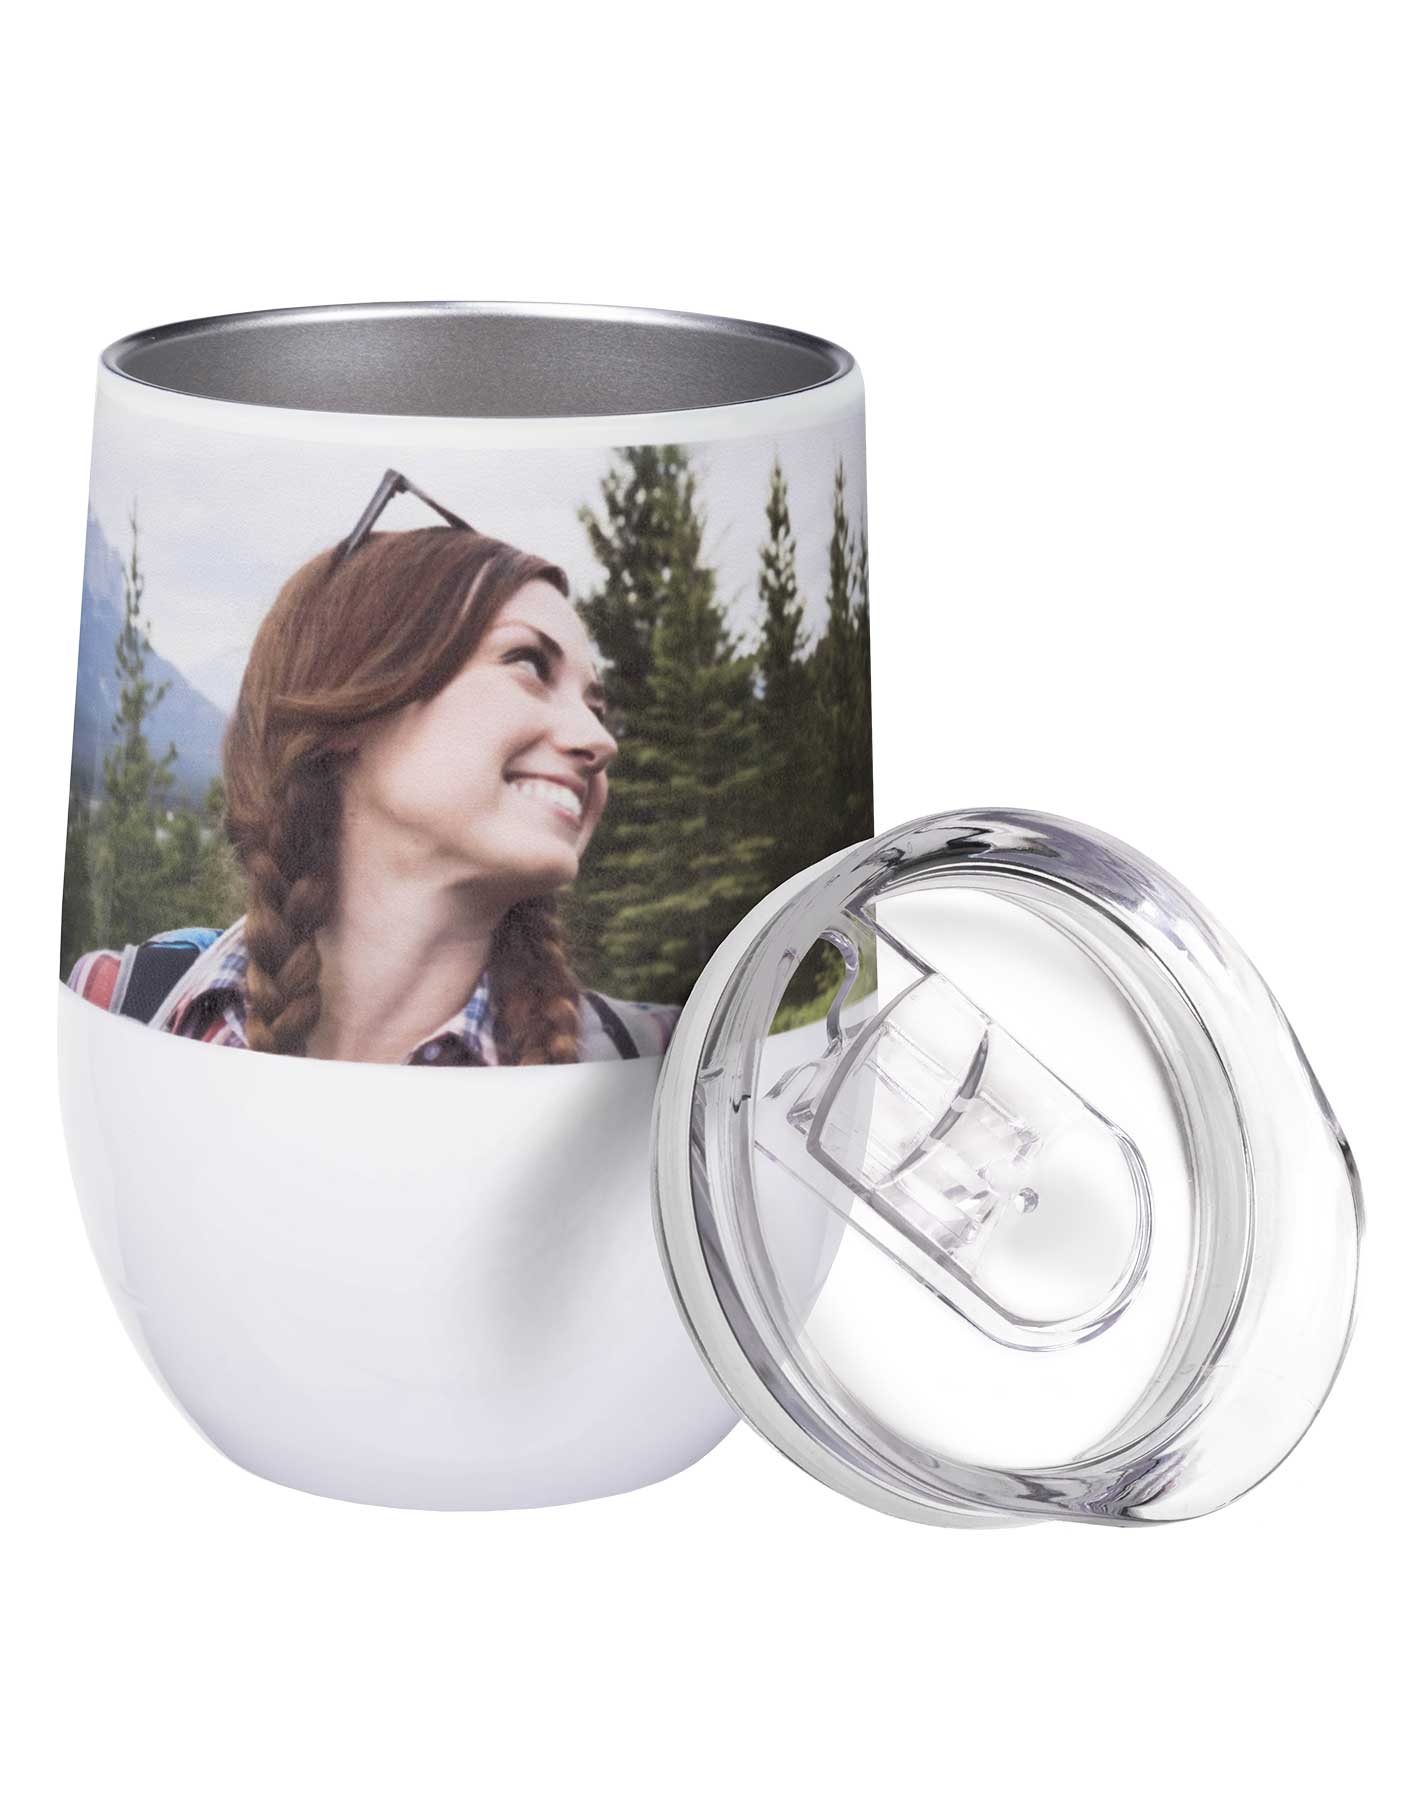 https://www.goodprints.com/wp-content/uploads/2019/07/insulated-steel-wine-tumbler-with-personalized-photo-print.jpg